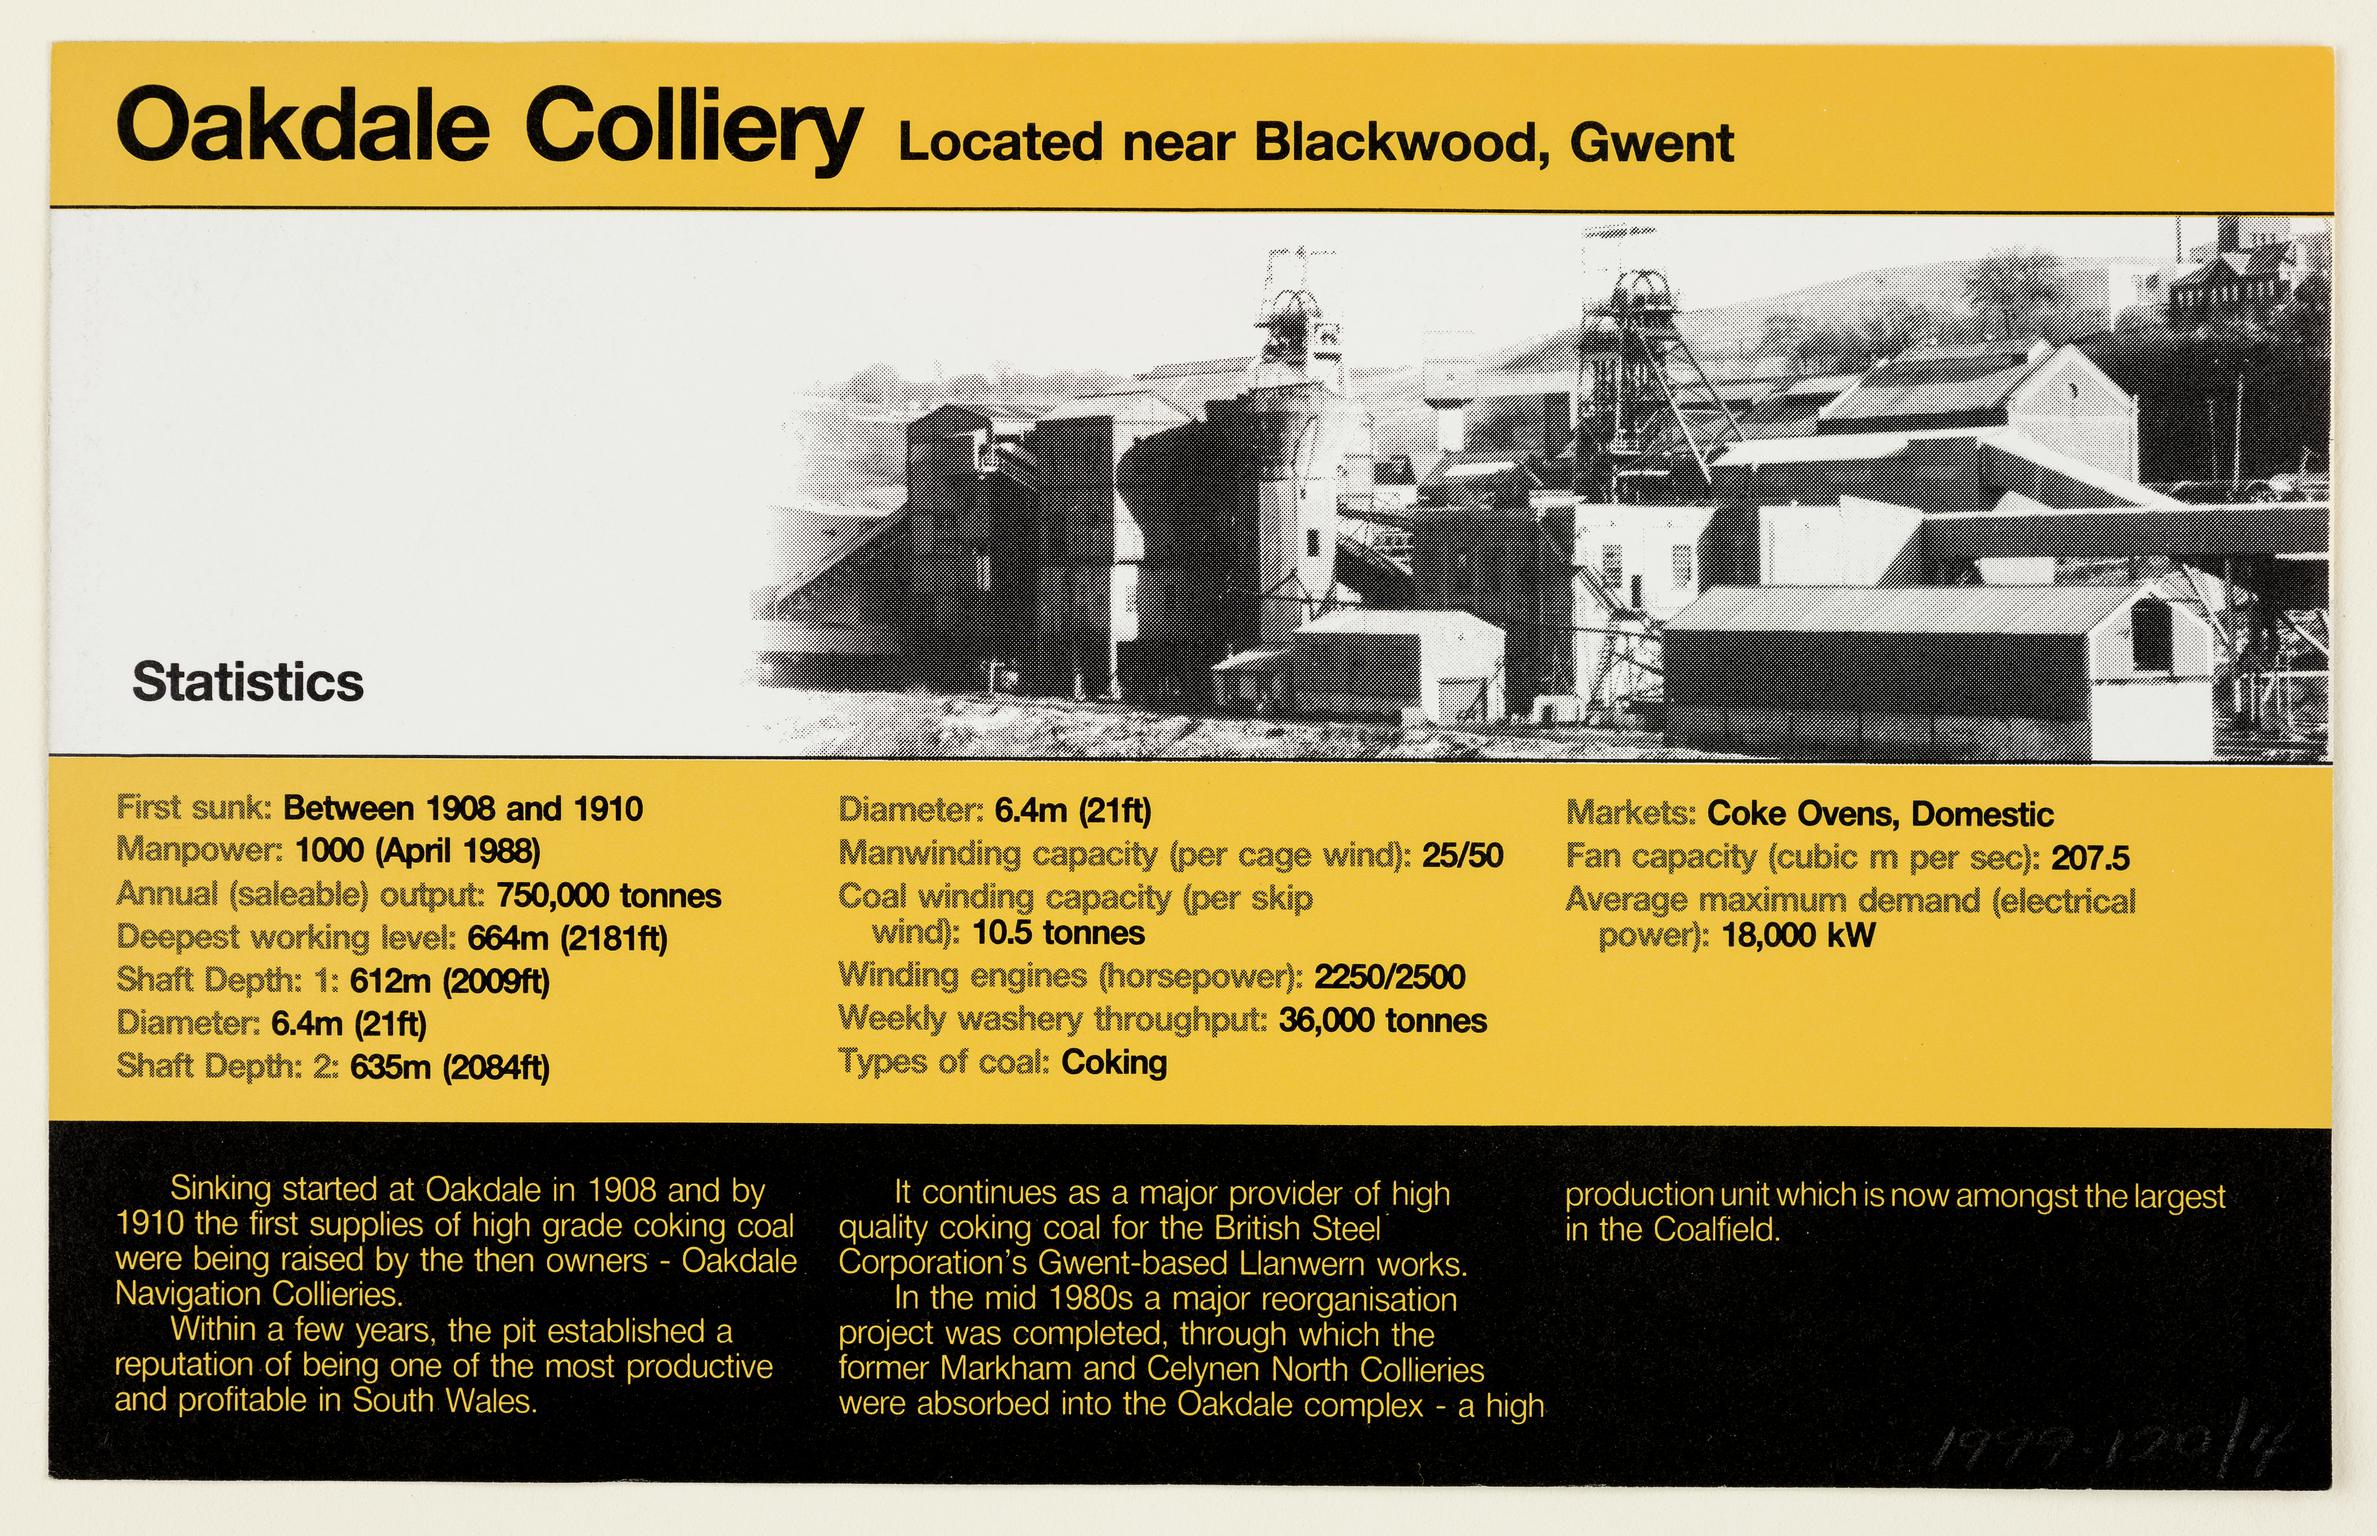 British Coal South Wales Oakdale Colliery (fact sheet)